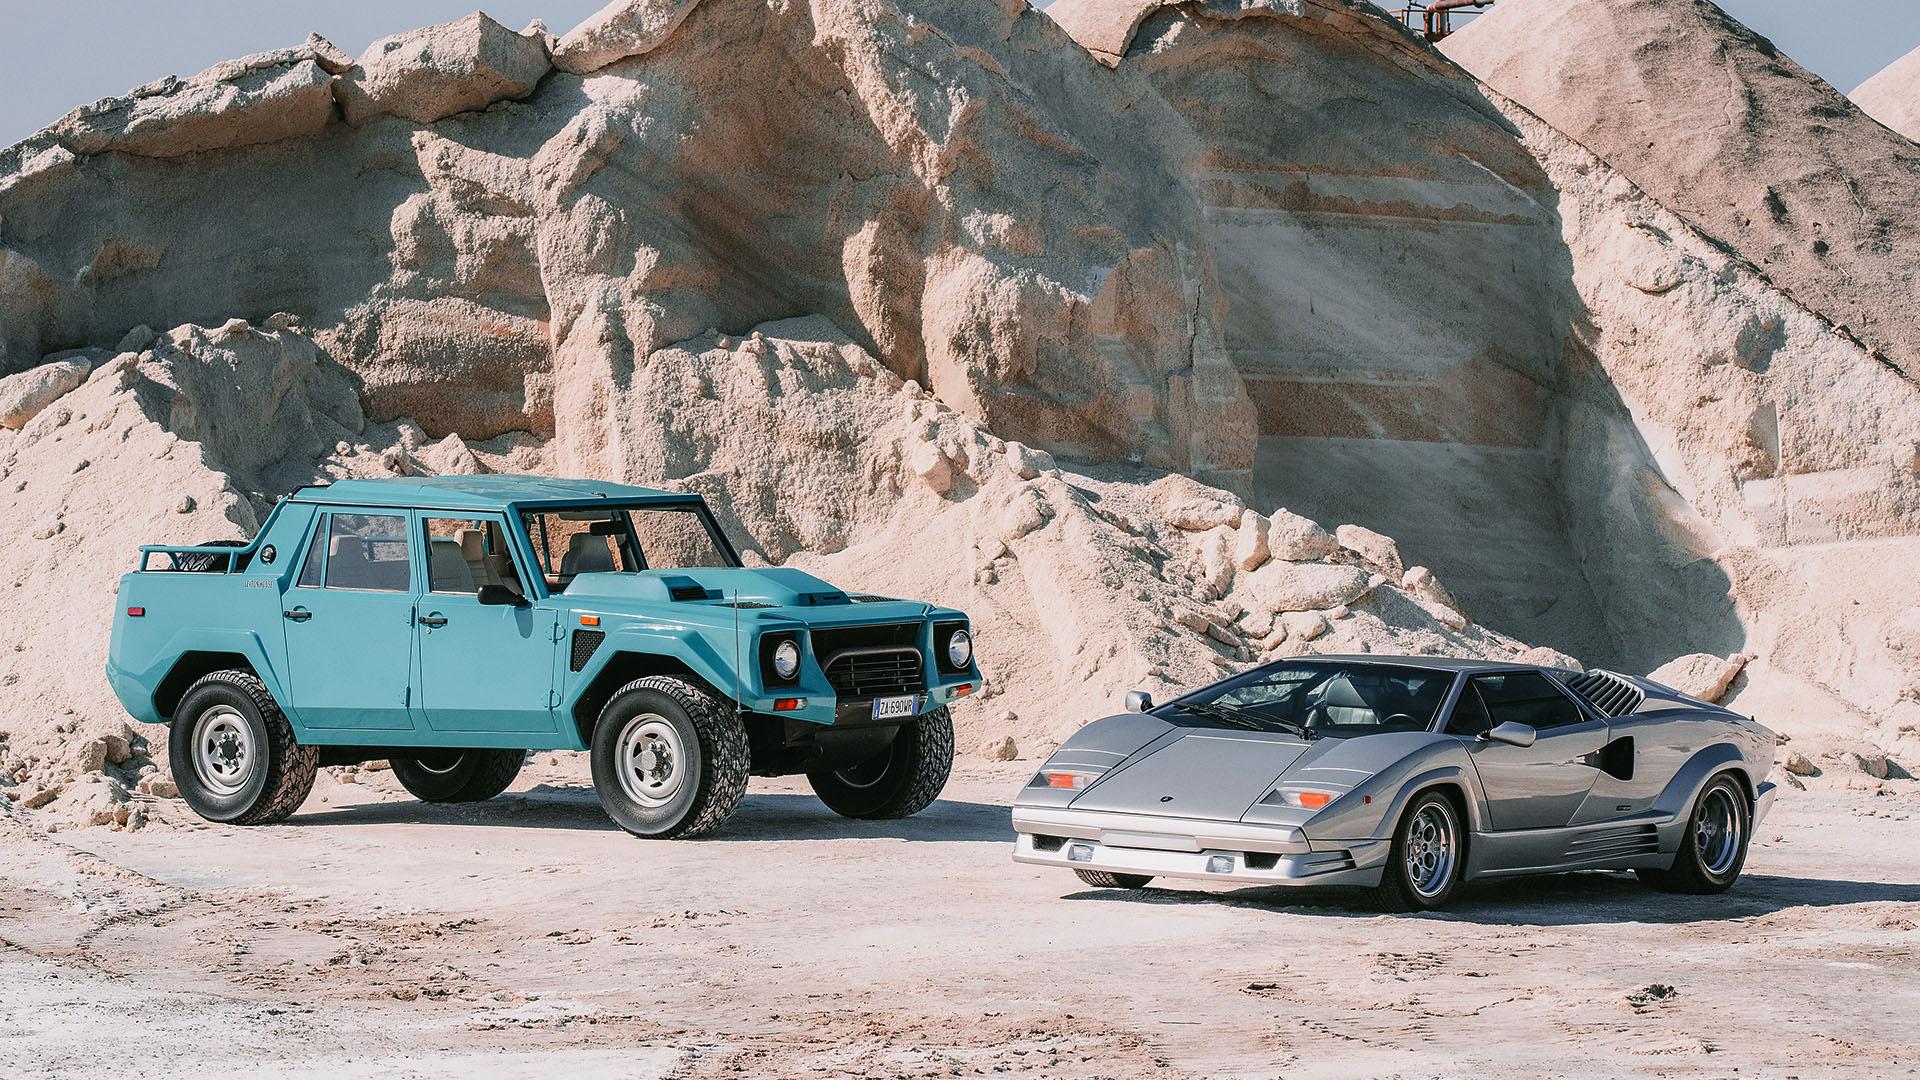 Countach and lm002 v12 1